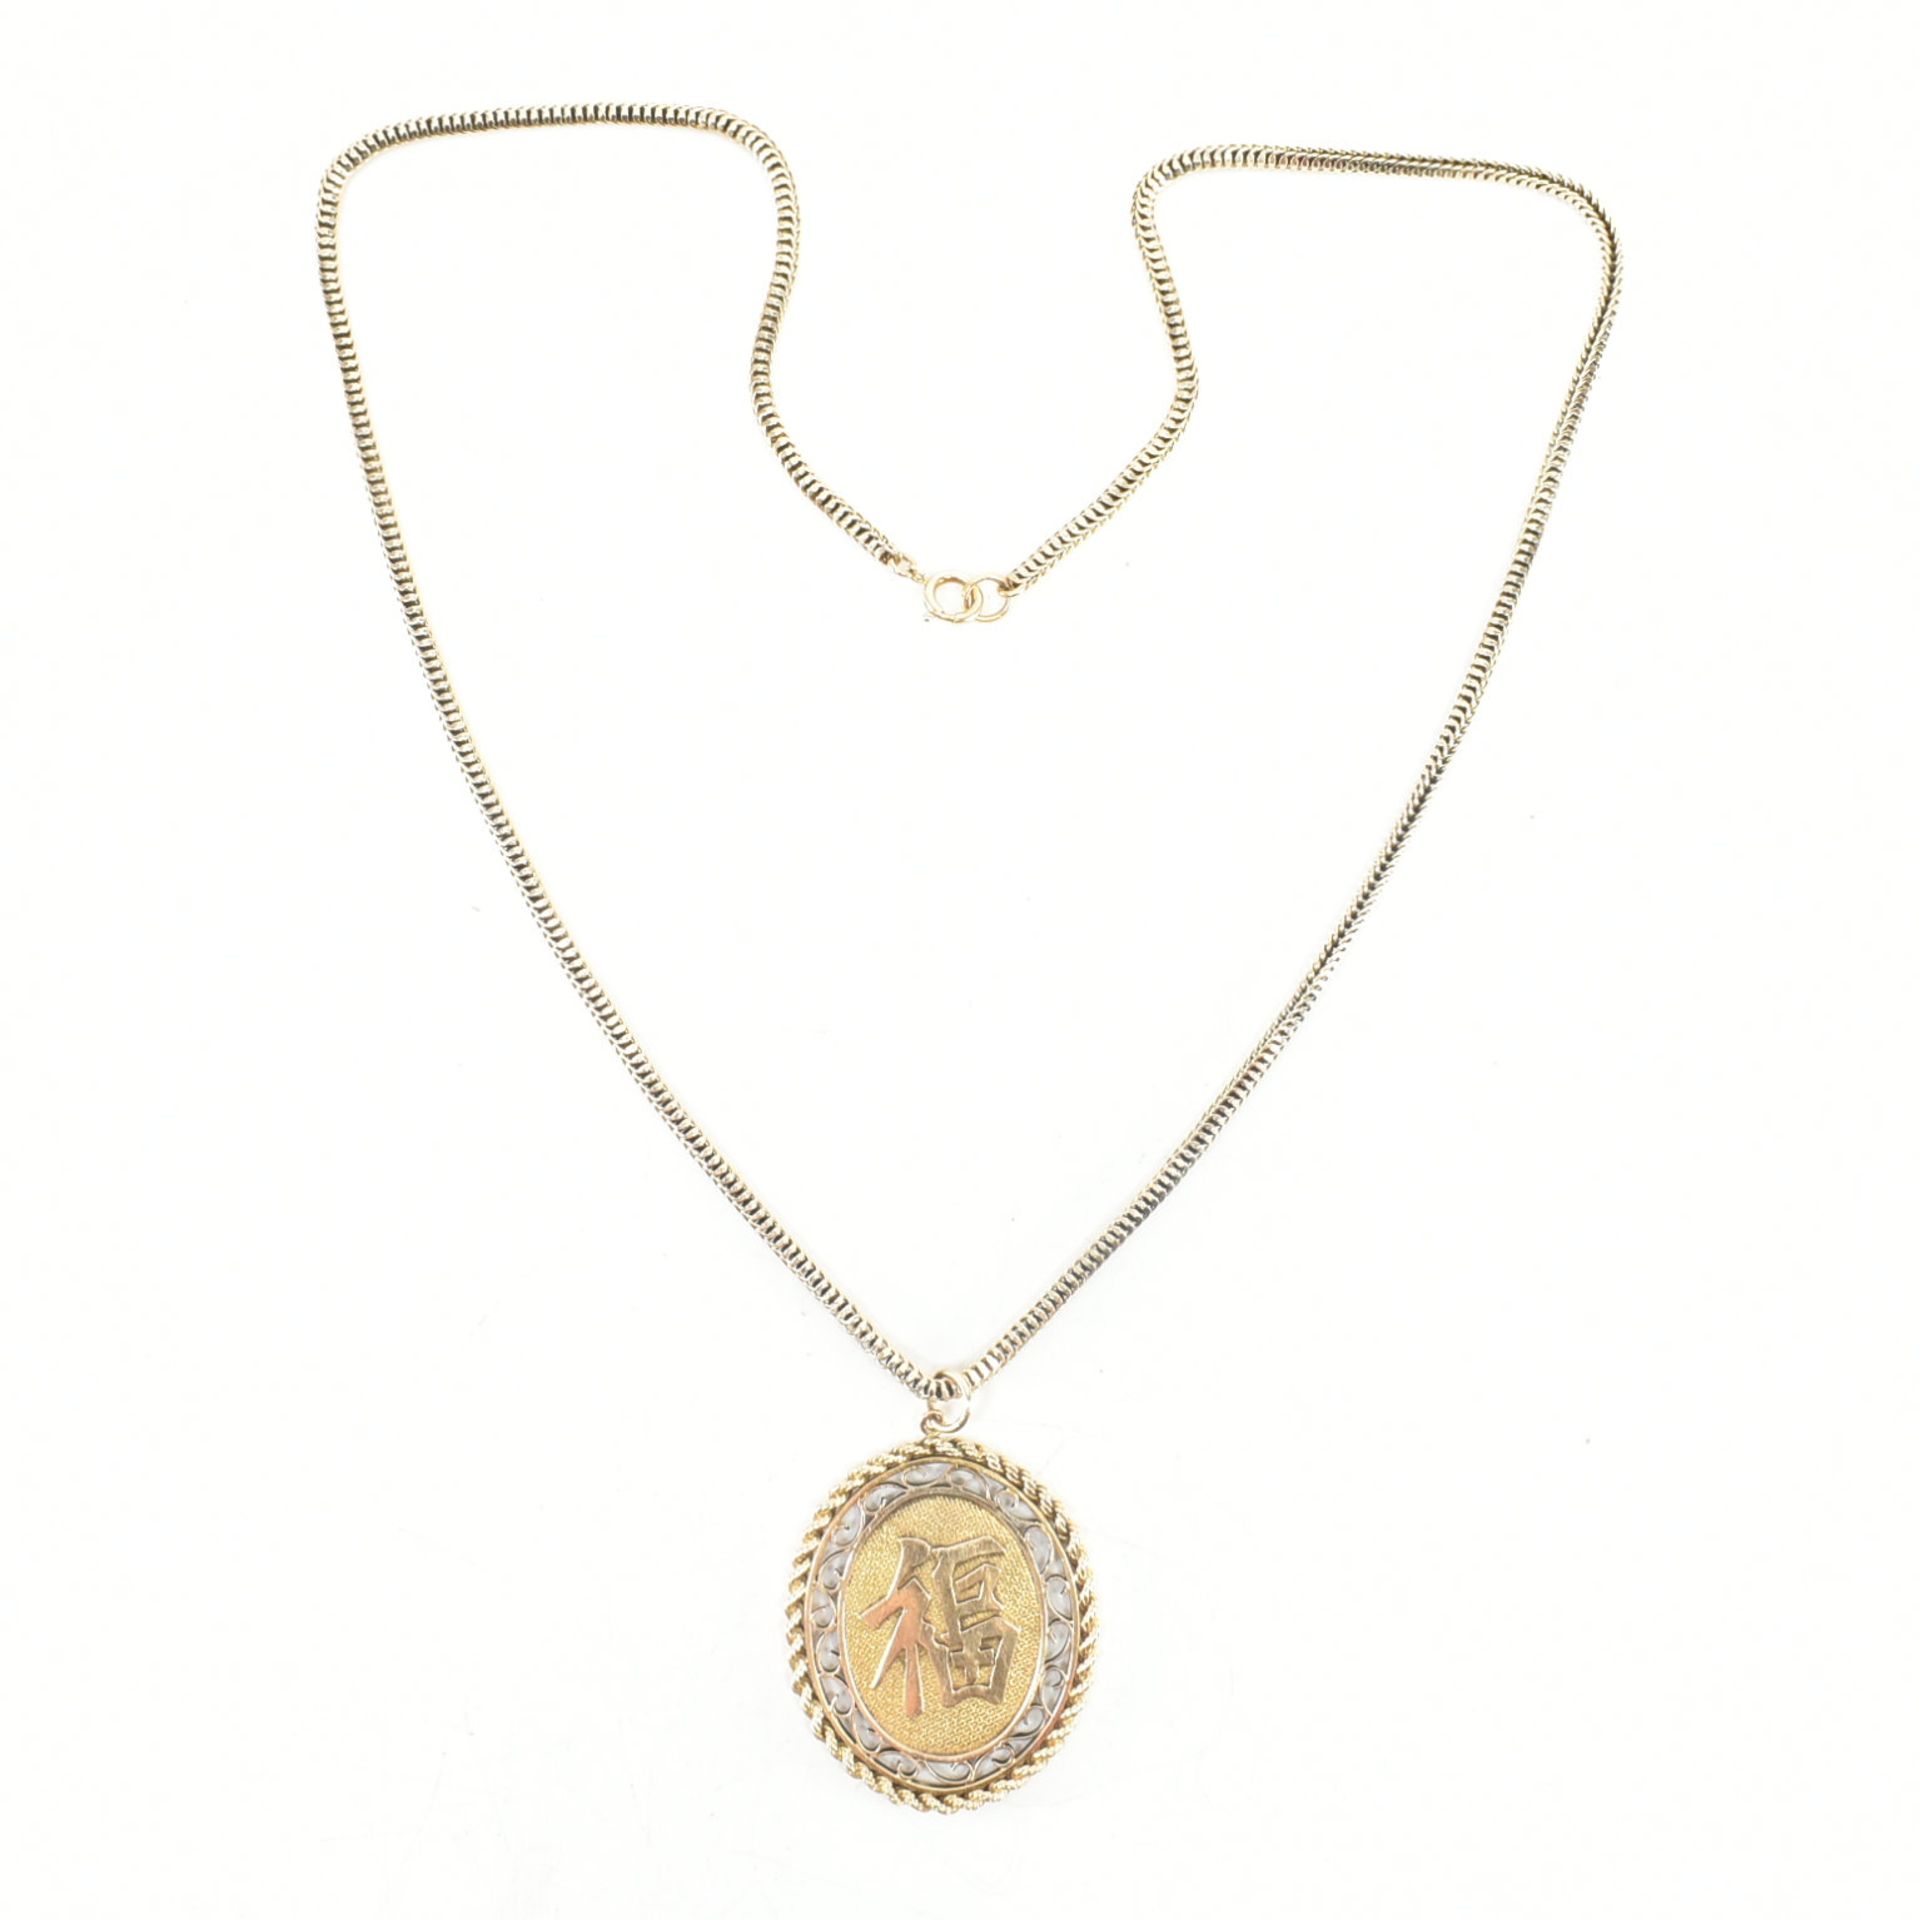 CHINESE GOLD PENDANT NECKLACE - Image 2 of 4